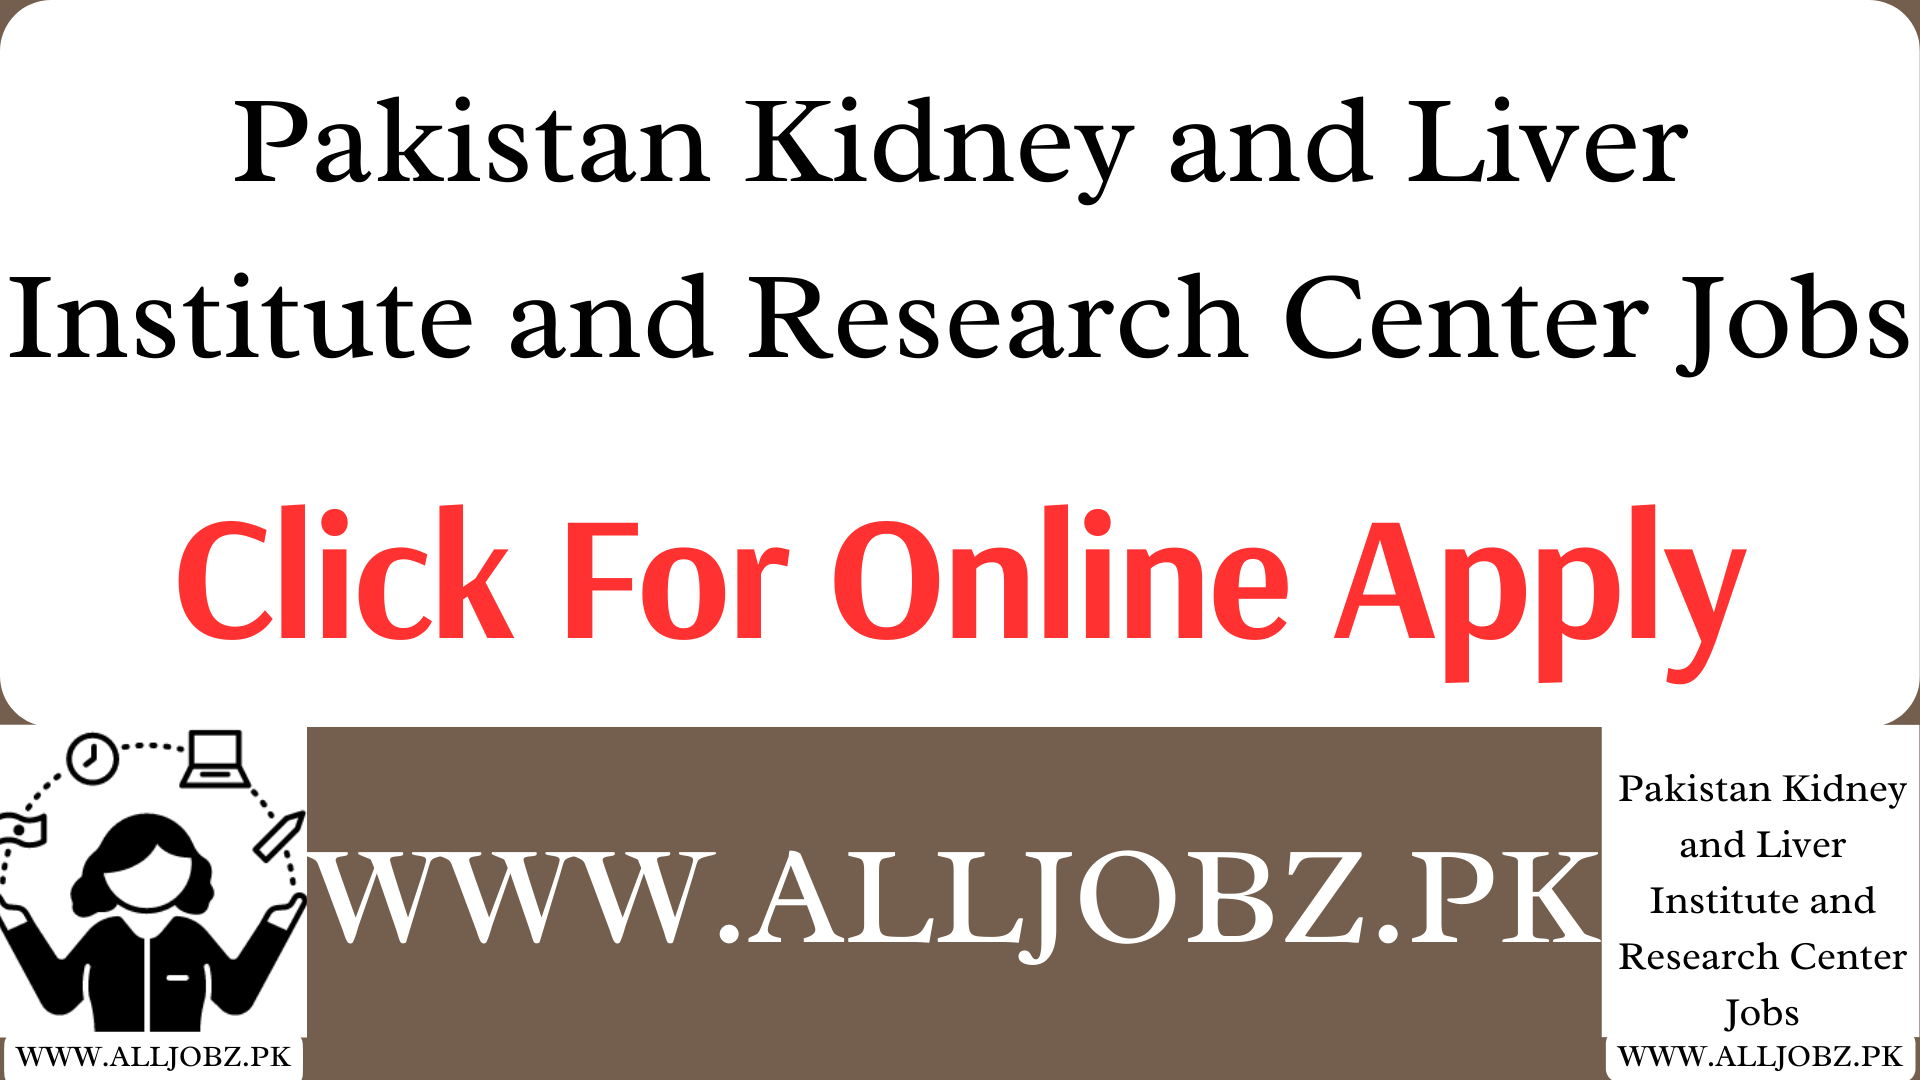 Exciting Career Opportunities At Pakistan Kidney And Liver Institute And Research Center, Pkli Jobs Apply Online, Pakistan Kidney And Liver Institute And Research Center Jobs Online Jobs.pkli.org.pk 440, Pkli Jobs For Nurses, Https Jobs Pkli Org Pk 440 Online Apply Login, Pakistan Kidney &Amp; Liver Institute And Research Centre Lahore, Pkli Hospital Lahore Address,